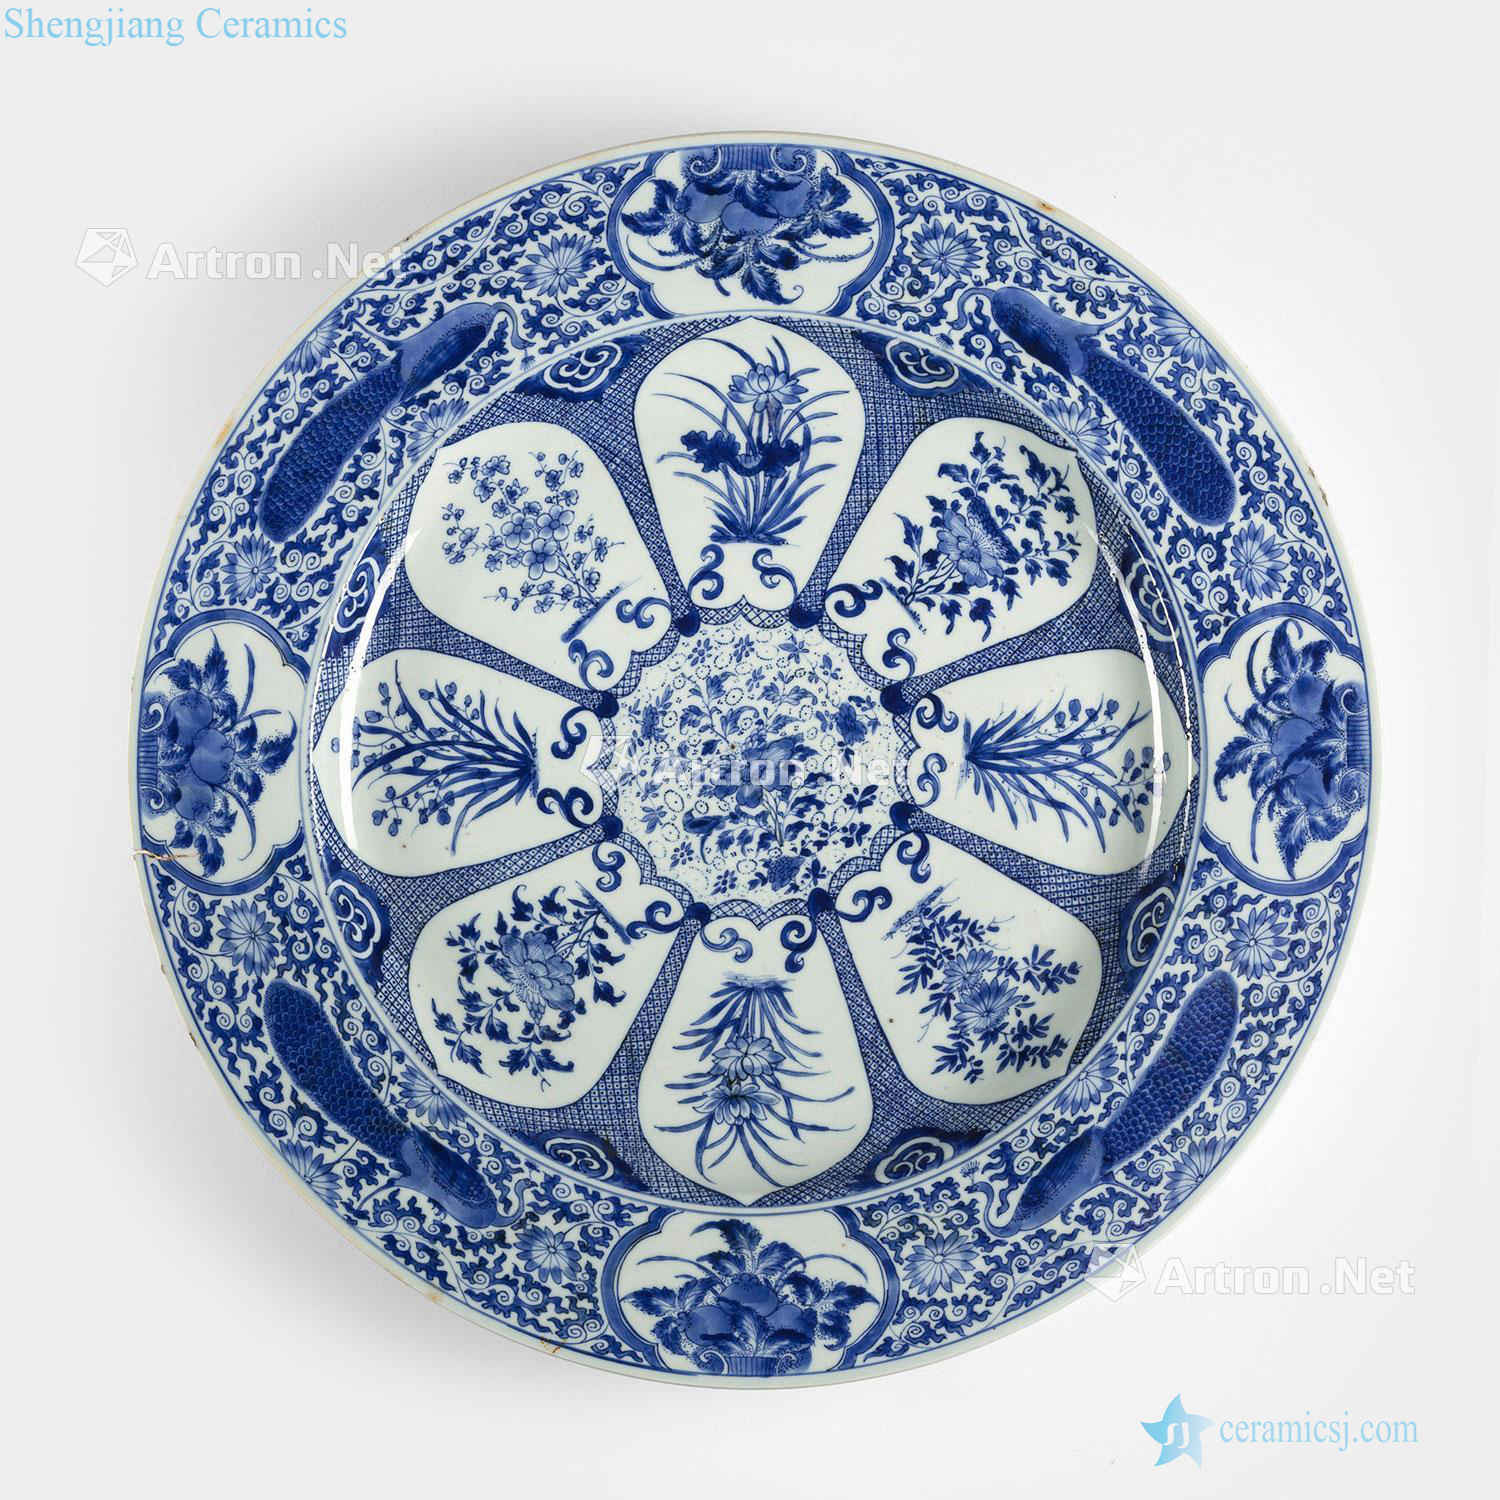 The qing emperor kangxi under glaze blue and white floral peacock medallion auspicious patterns to fold along the plate